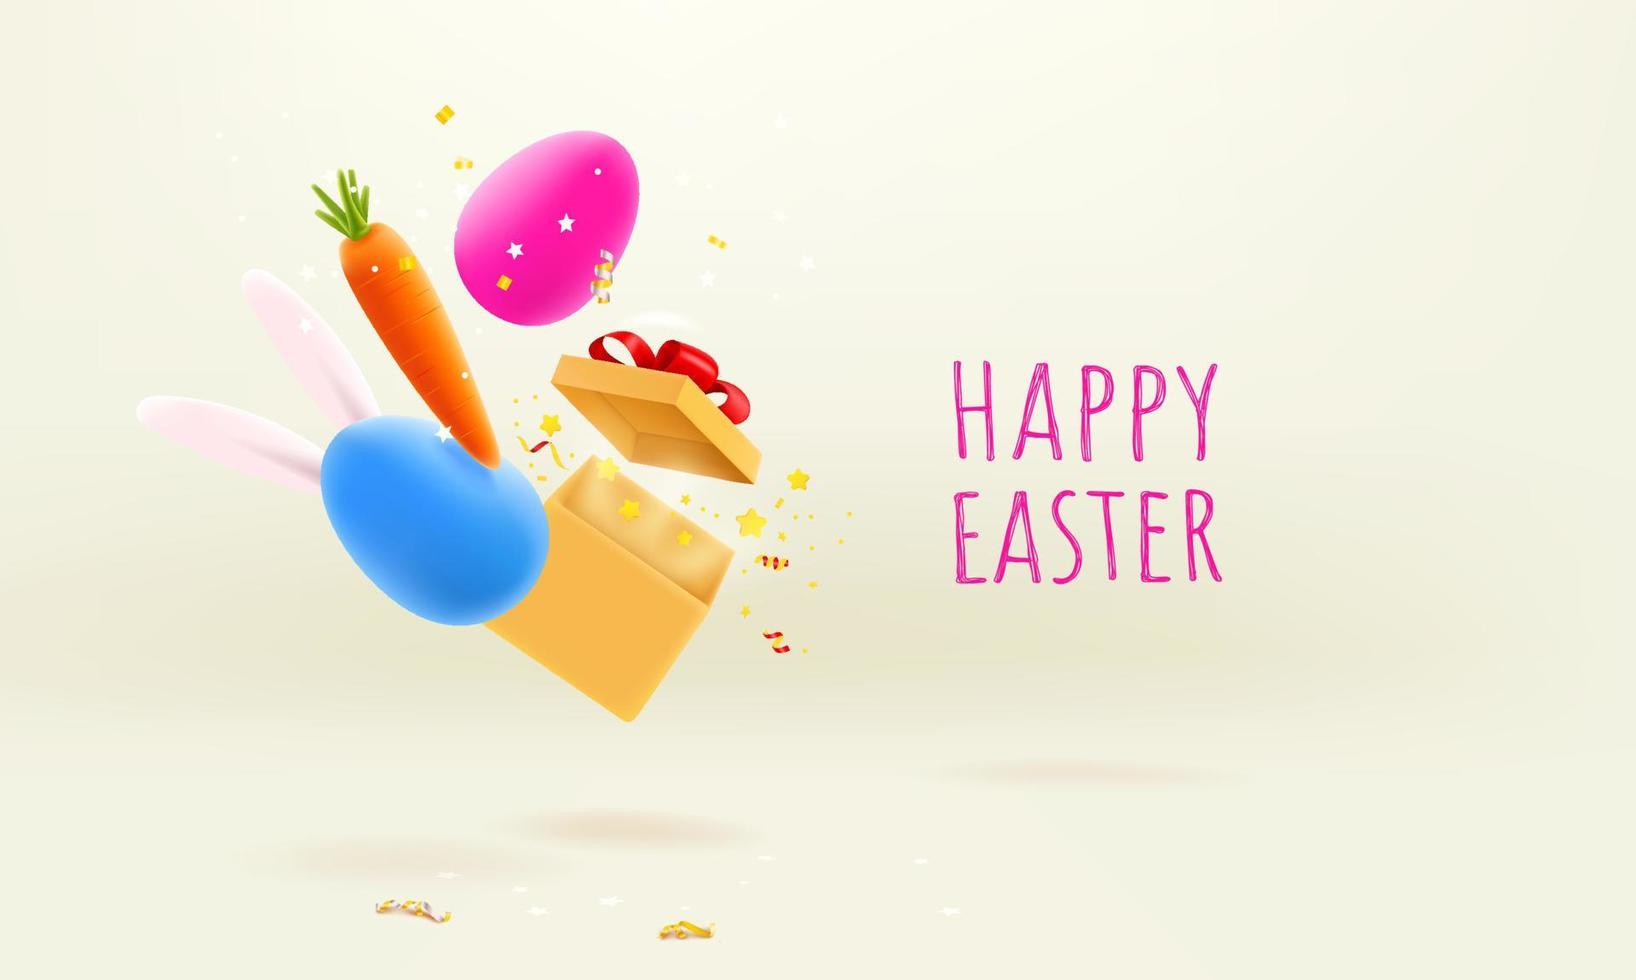 Happy Easter card. Easter banner with falling down realistic objects. Gift box, carrot, confetti and eggs vector